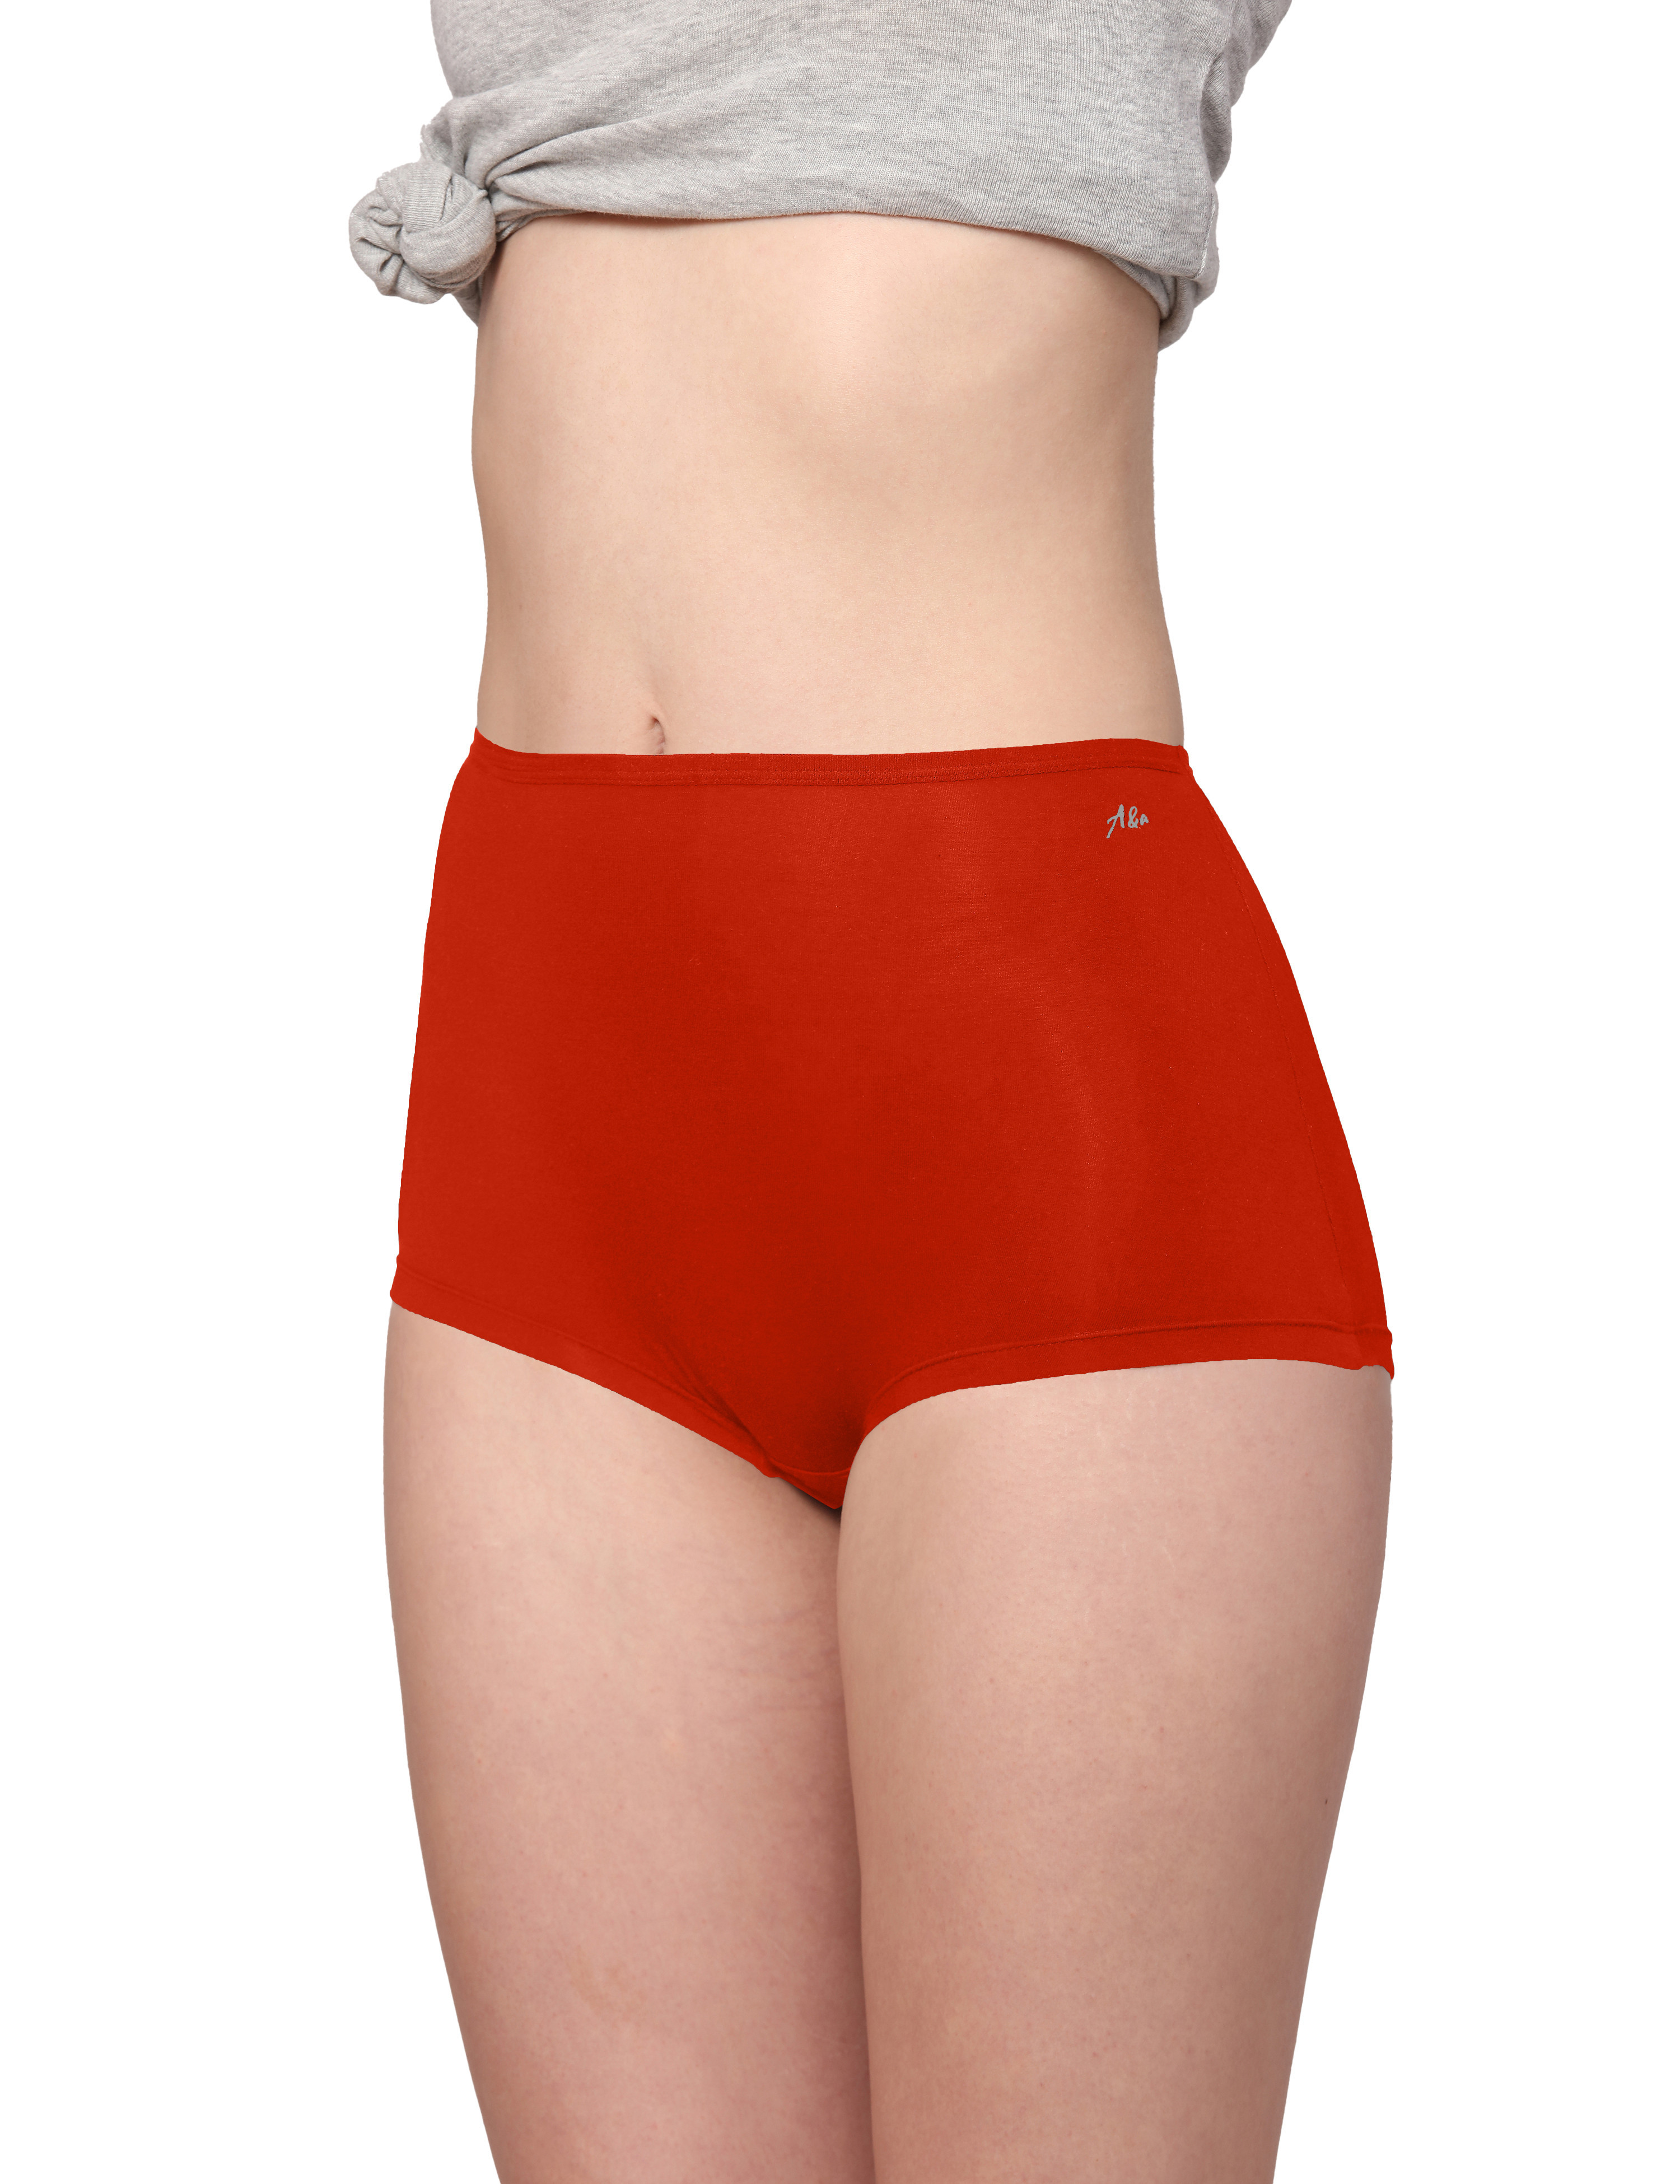 Buy AshleyandAlvis Anti Bacterial, Bamboo MicroModal, Premium Panty, Women  BOYSLEG brief, No Itching, 2X Moisture Wicking Daily use Underwear, Odour  Free, (Color-RED-RED-RED) (PACK OF 3) for Women Online in India